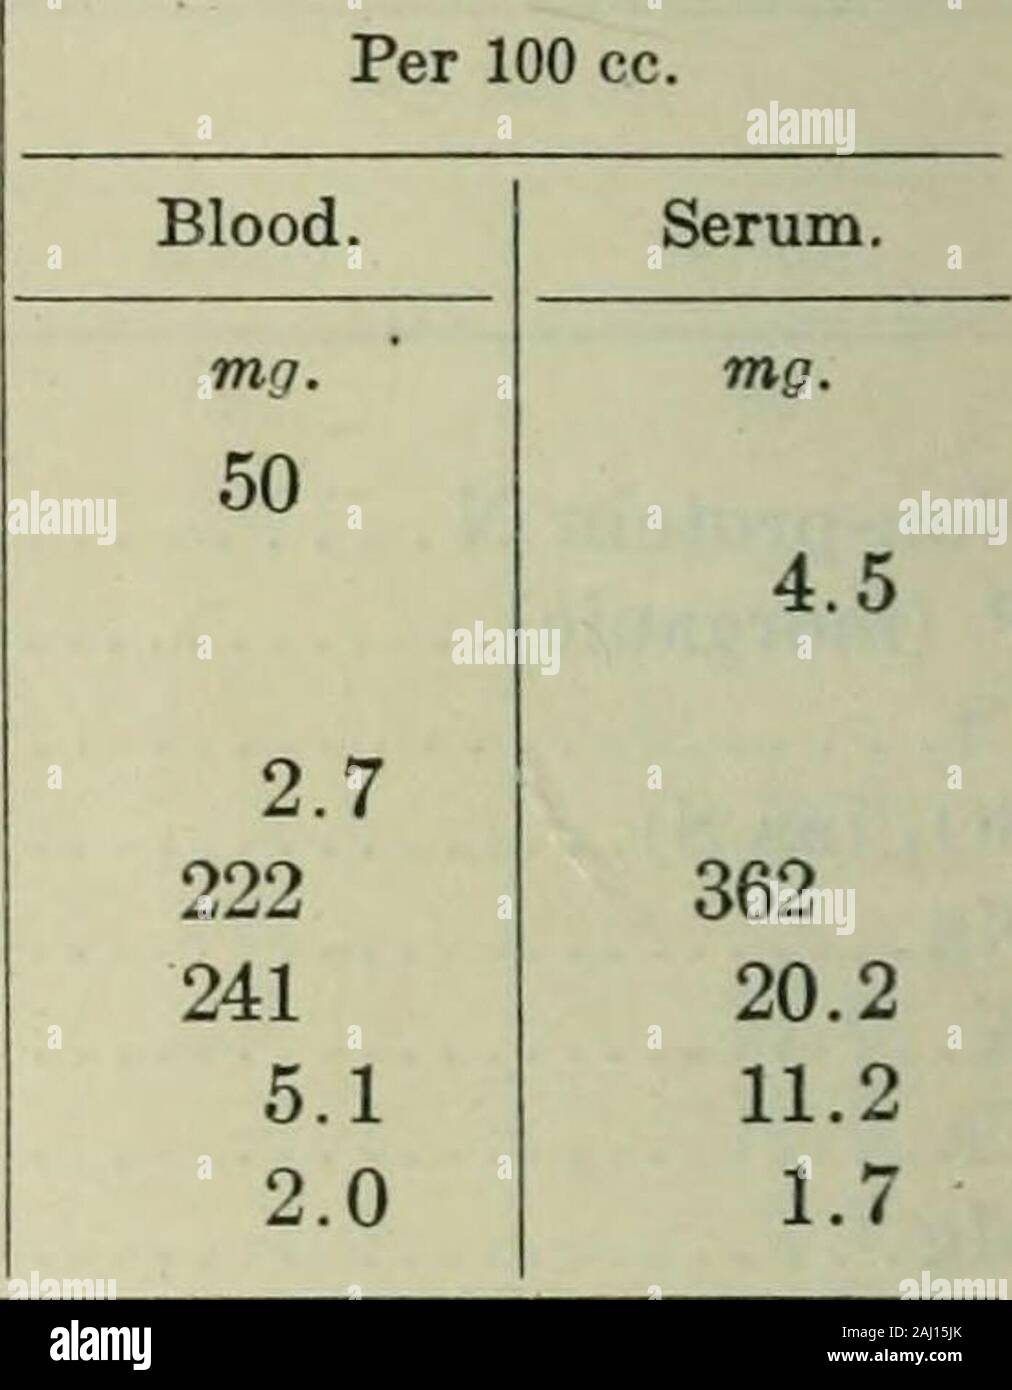 The Journal of biological chemistry . Weight 1,903 gm.Dec. 11, 1922. The animal, which had been without food for 24 hours,was injected subcutaneously with 2 gm. of Kahlbaums tartaric acid whichhad been neutralized with Na2C03. The total volume of liquid injectedamounted to 12 cc. On Dec. 12 the animal refused food and passed urinecontaining a large trace of albumin. On Dec. 13 he was bled from thecarotid artery. Per 100 cc. Blood. Serum. Non-protein N mg.88 3.5 •213203 5.4 2.2 mg. PO4 (as P) 5.0 CI SO4 (as S) Na 287 K 18.6 Ca 9.6 Mg 1 7 480 Blood in Experimental Nephritis Experiment 9.Rabbit 1 Stock Photo